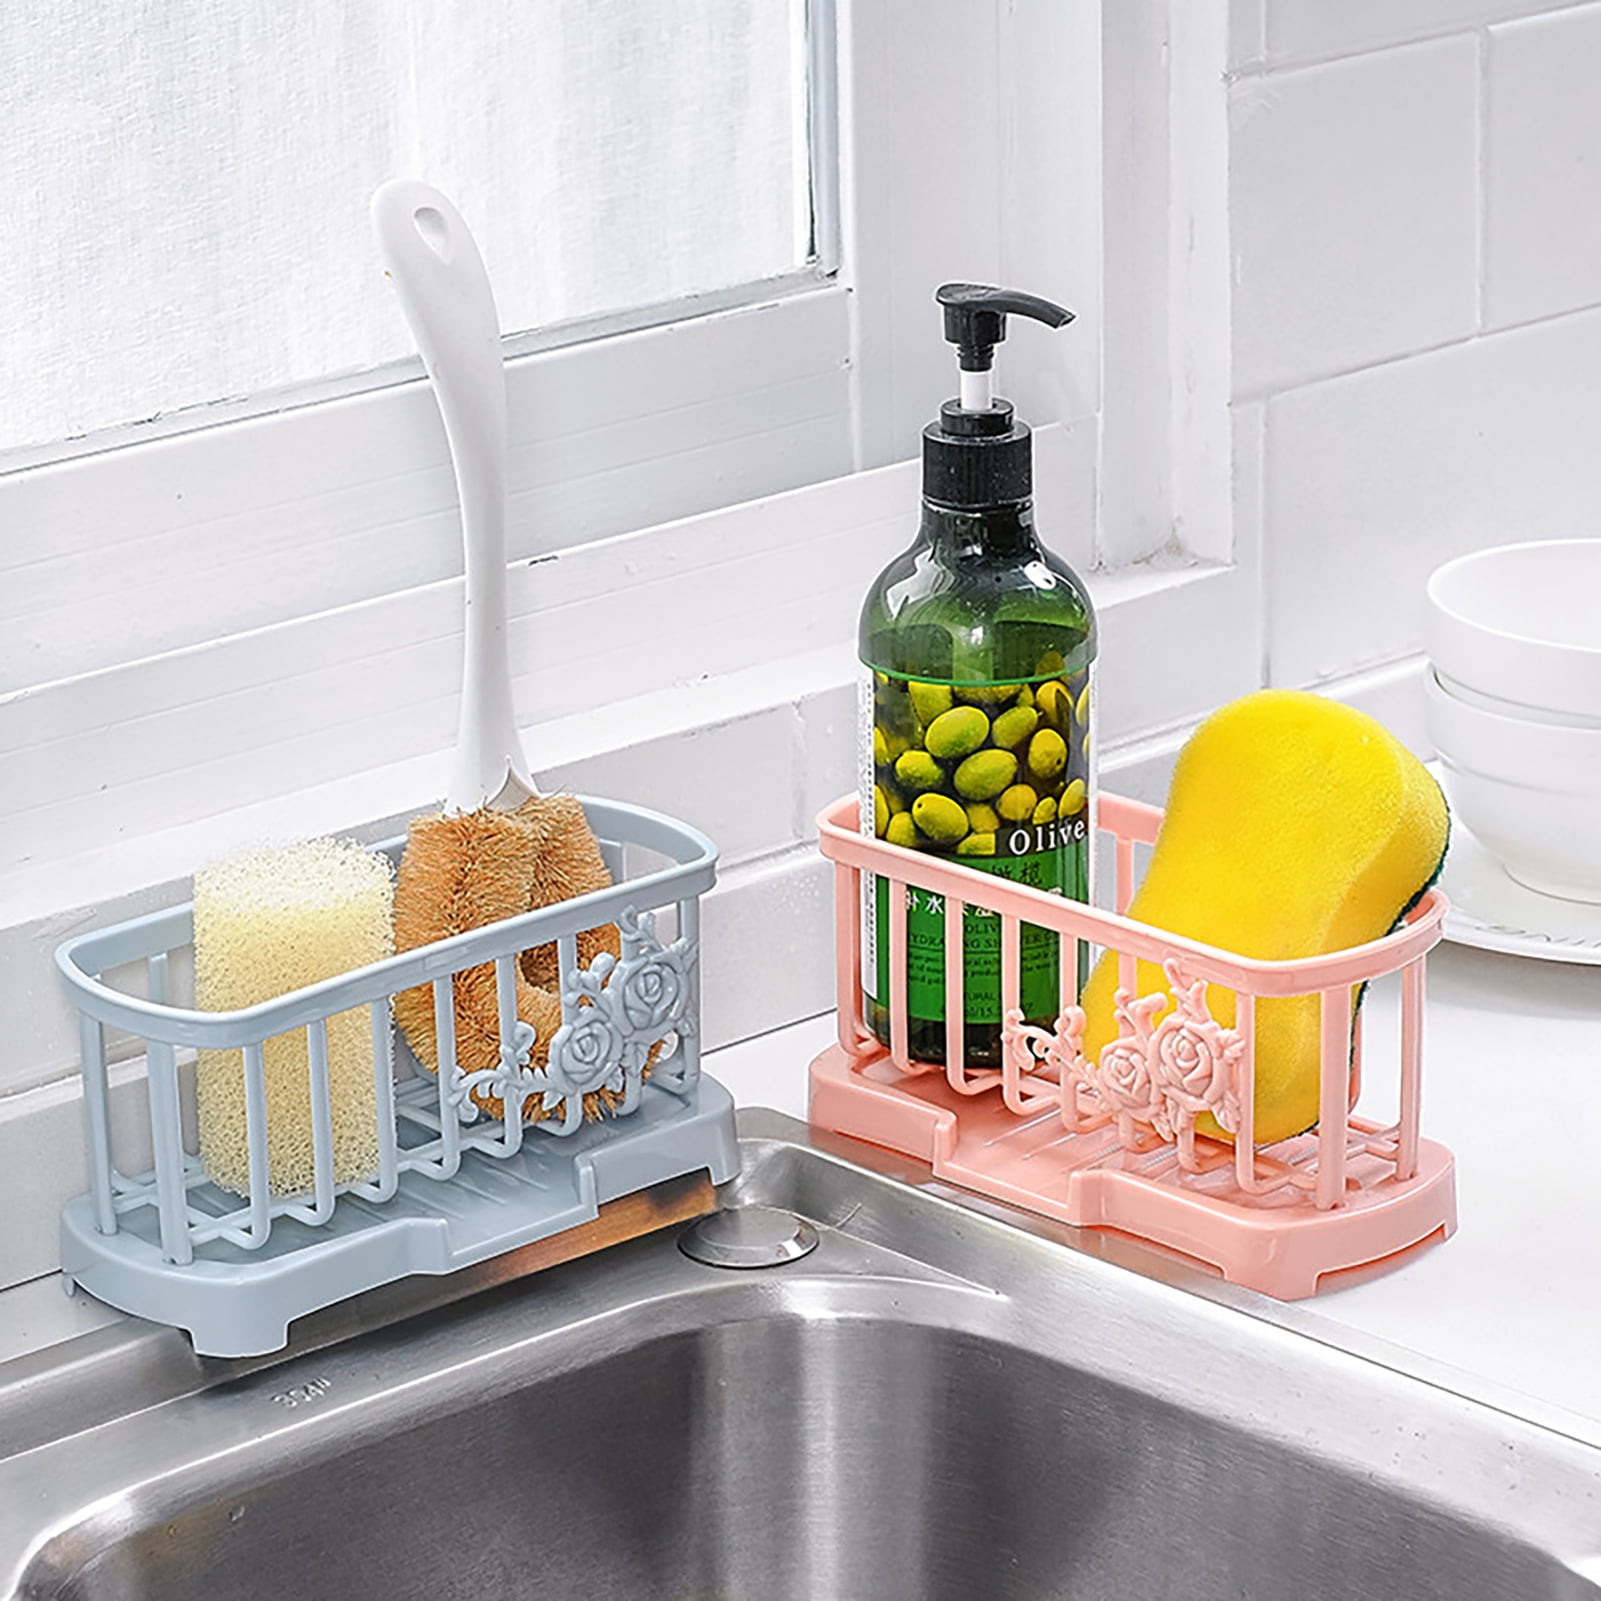 BEENLE 304 Stainless Steel Telescopic Sink Caddy Sponge Holder,Expandable  Kitchen Sink Organizer Dish Drainer Rack Sink Tray Brush Soap  Holder(16.7